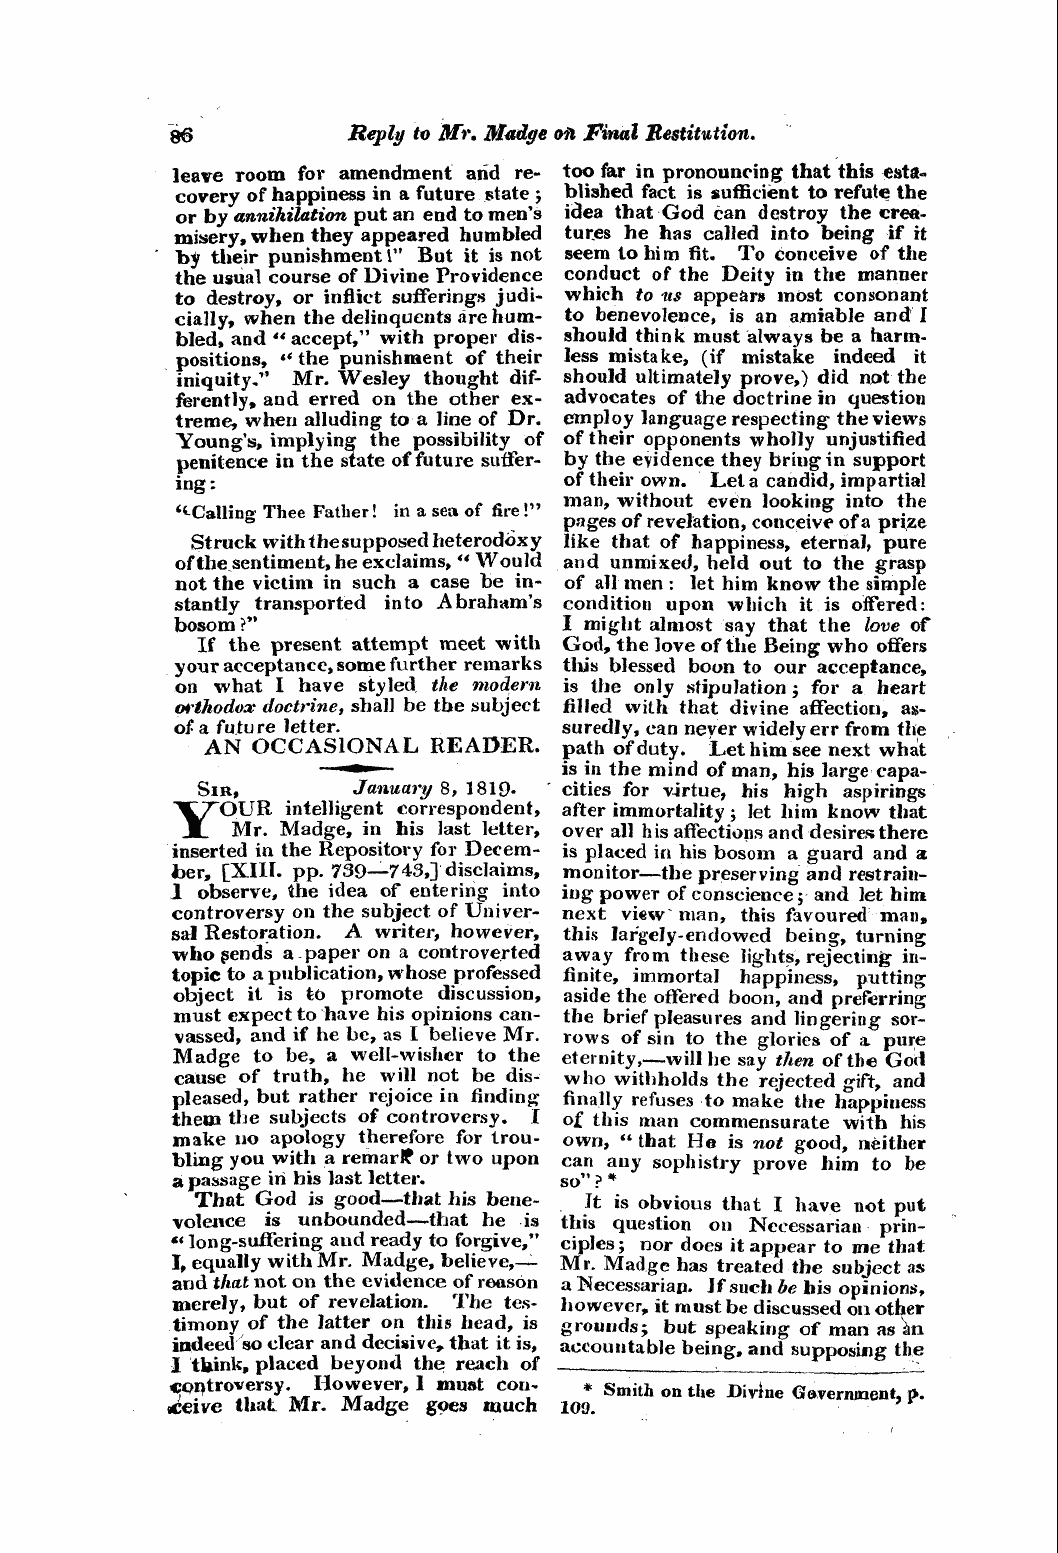 Monthly Repository (1806-1838) and Unitarian Chronicle (1832-1833): F Y, 1st edition, Supplement: 18